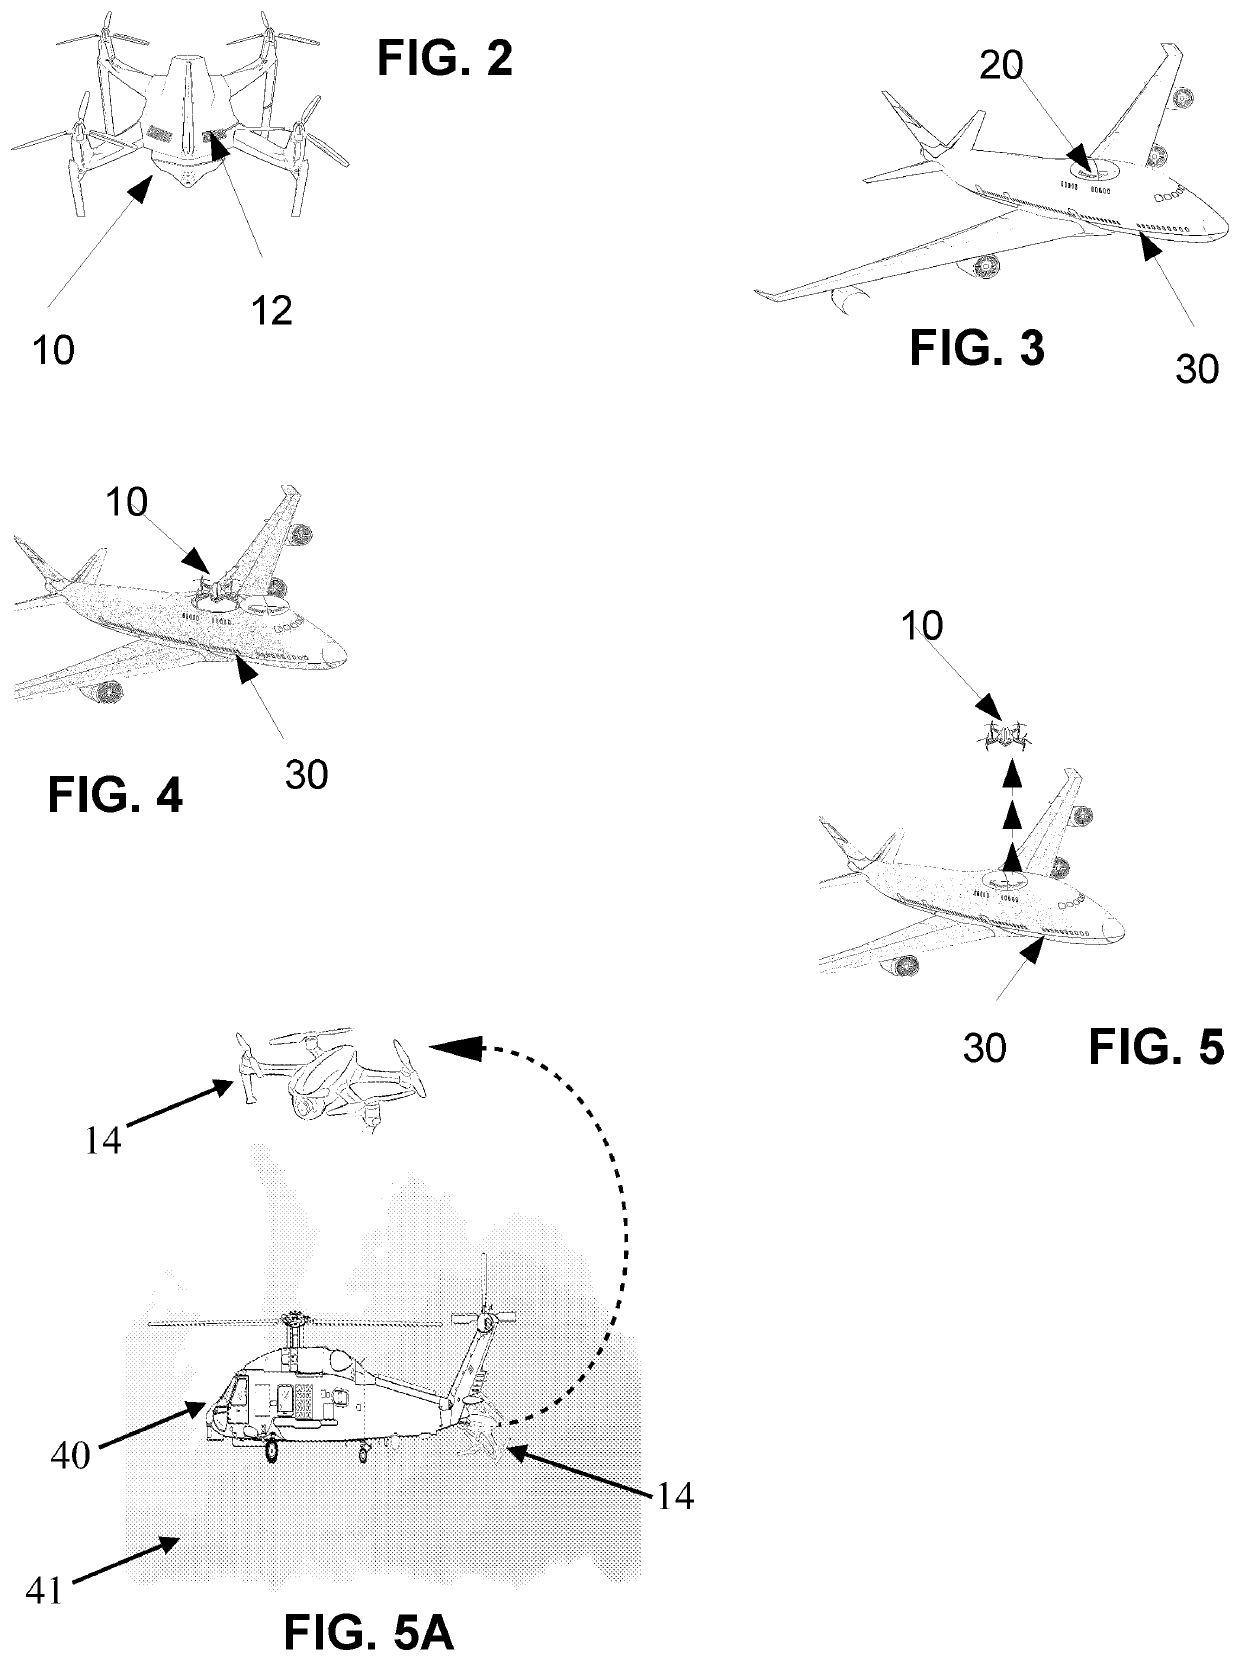 On-board emergency remote assistance and data retrievable system for an aerial vehicle